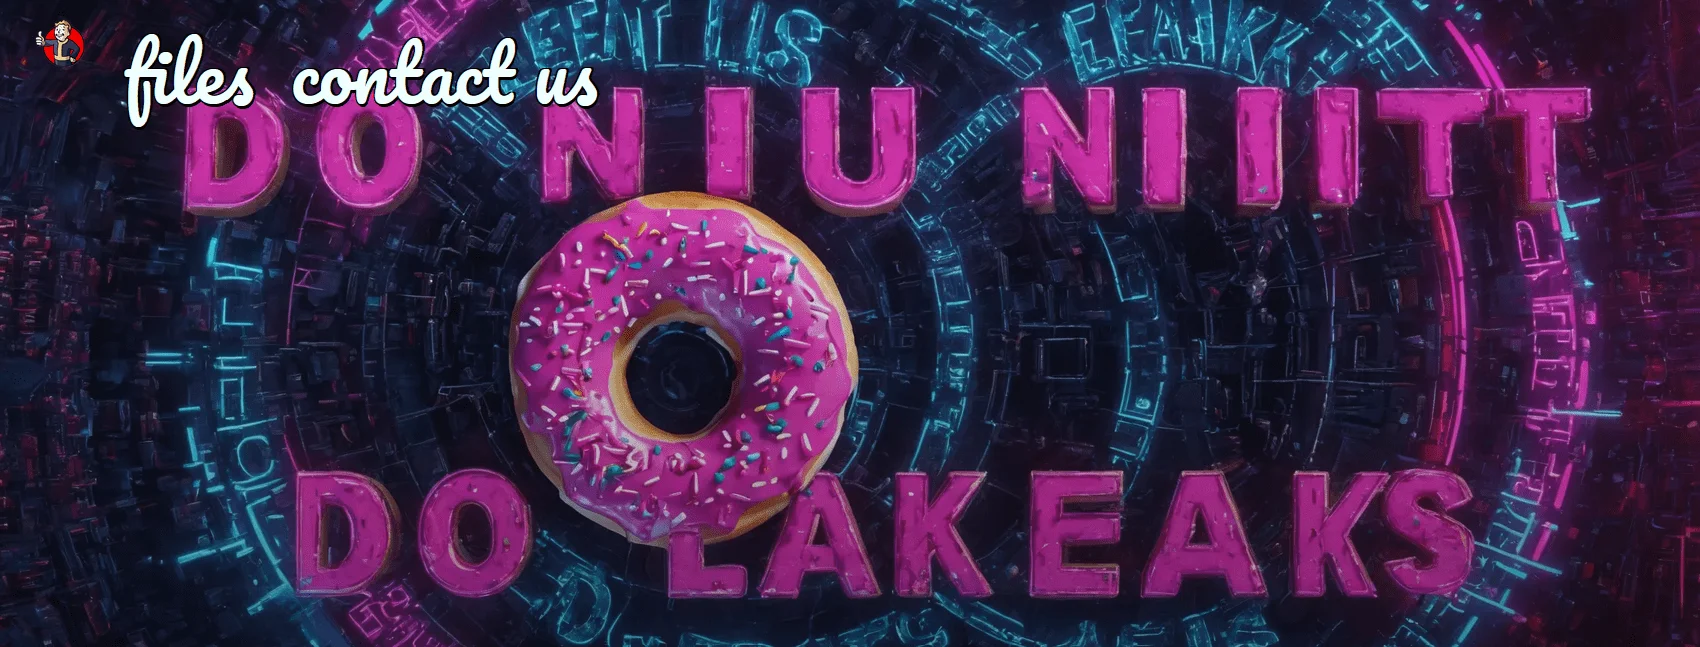 DonutLeaks’ logo in their main page, seems like AI generated text is not working.